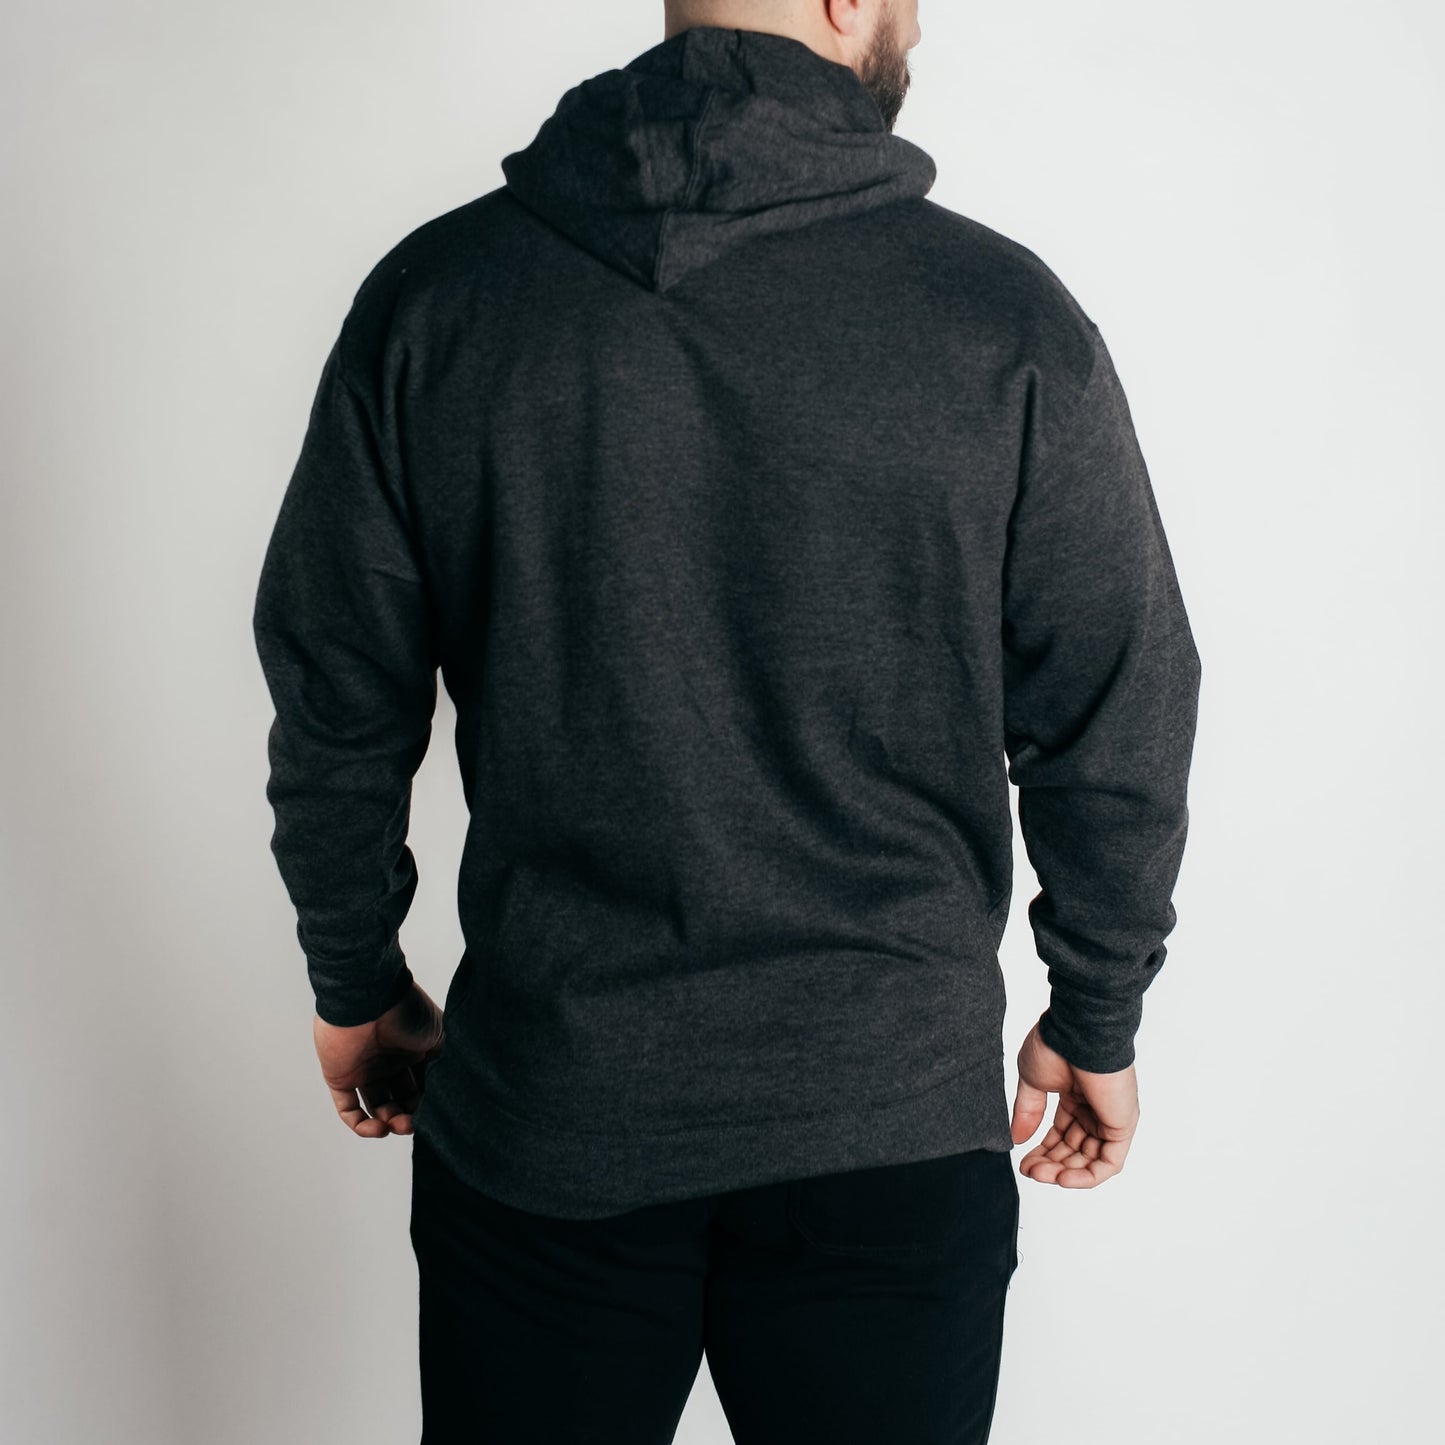 CL Foundation Hoodie // Charcoal Heather